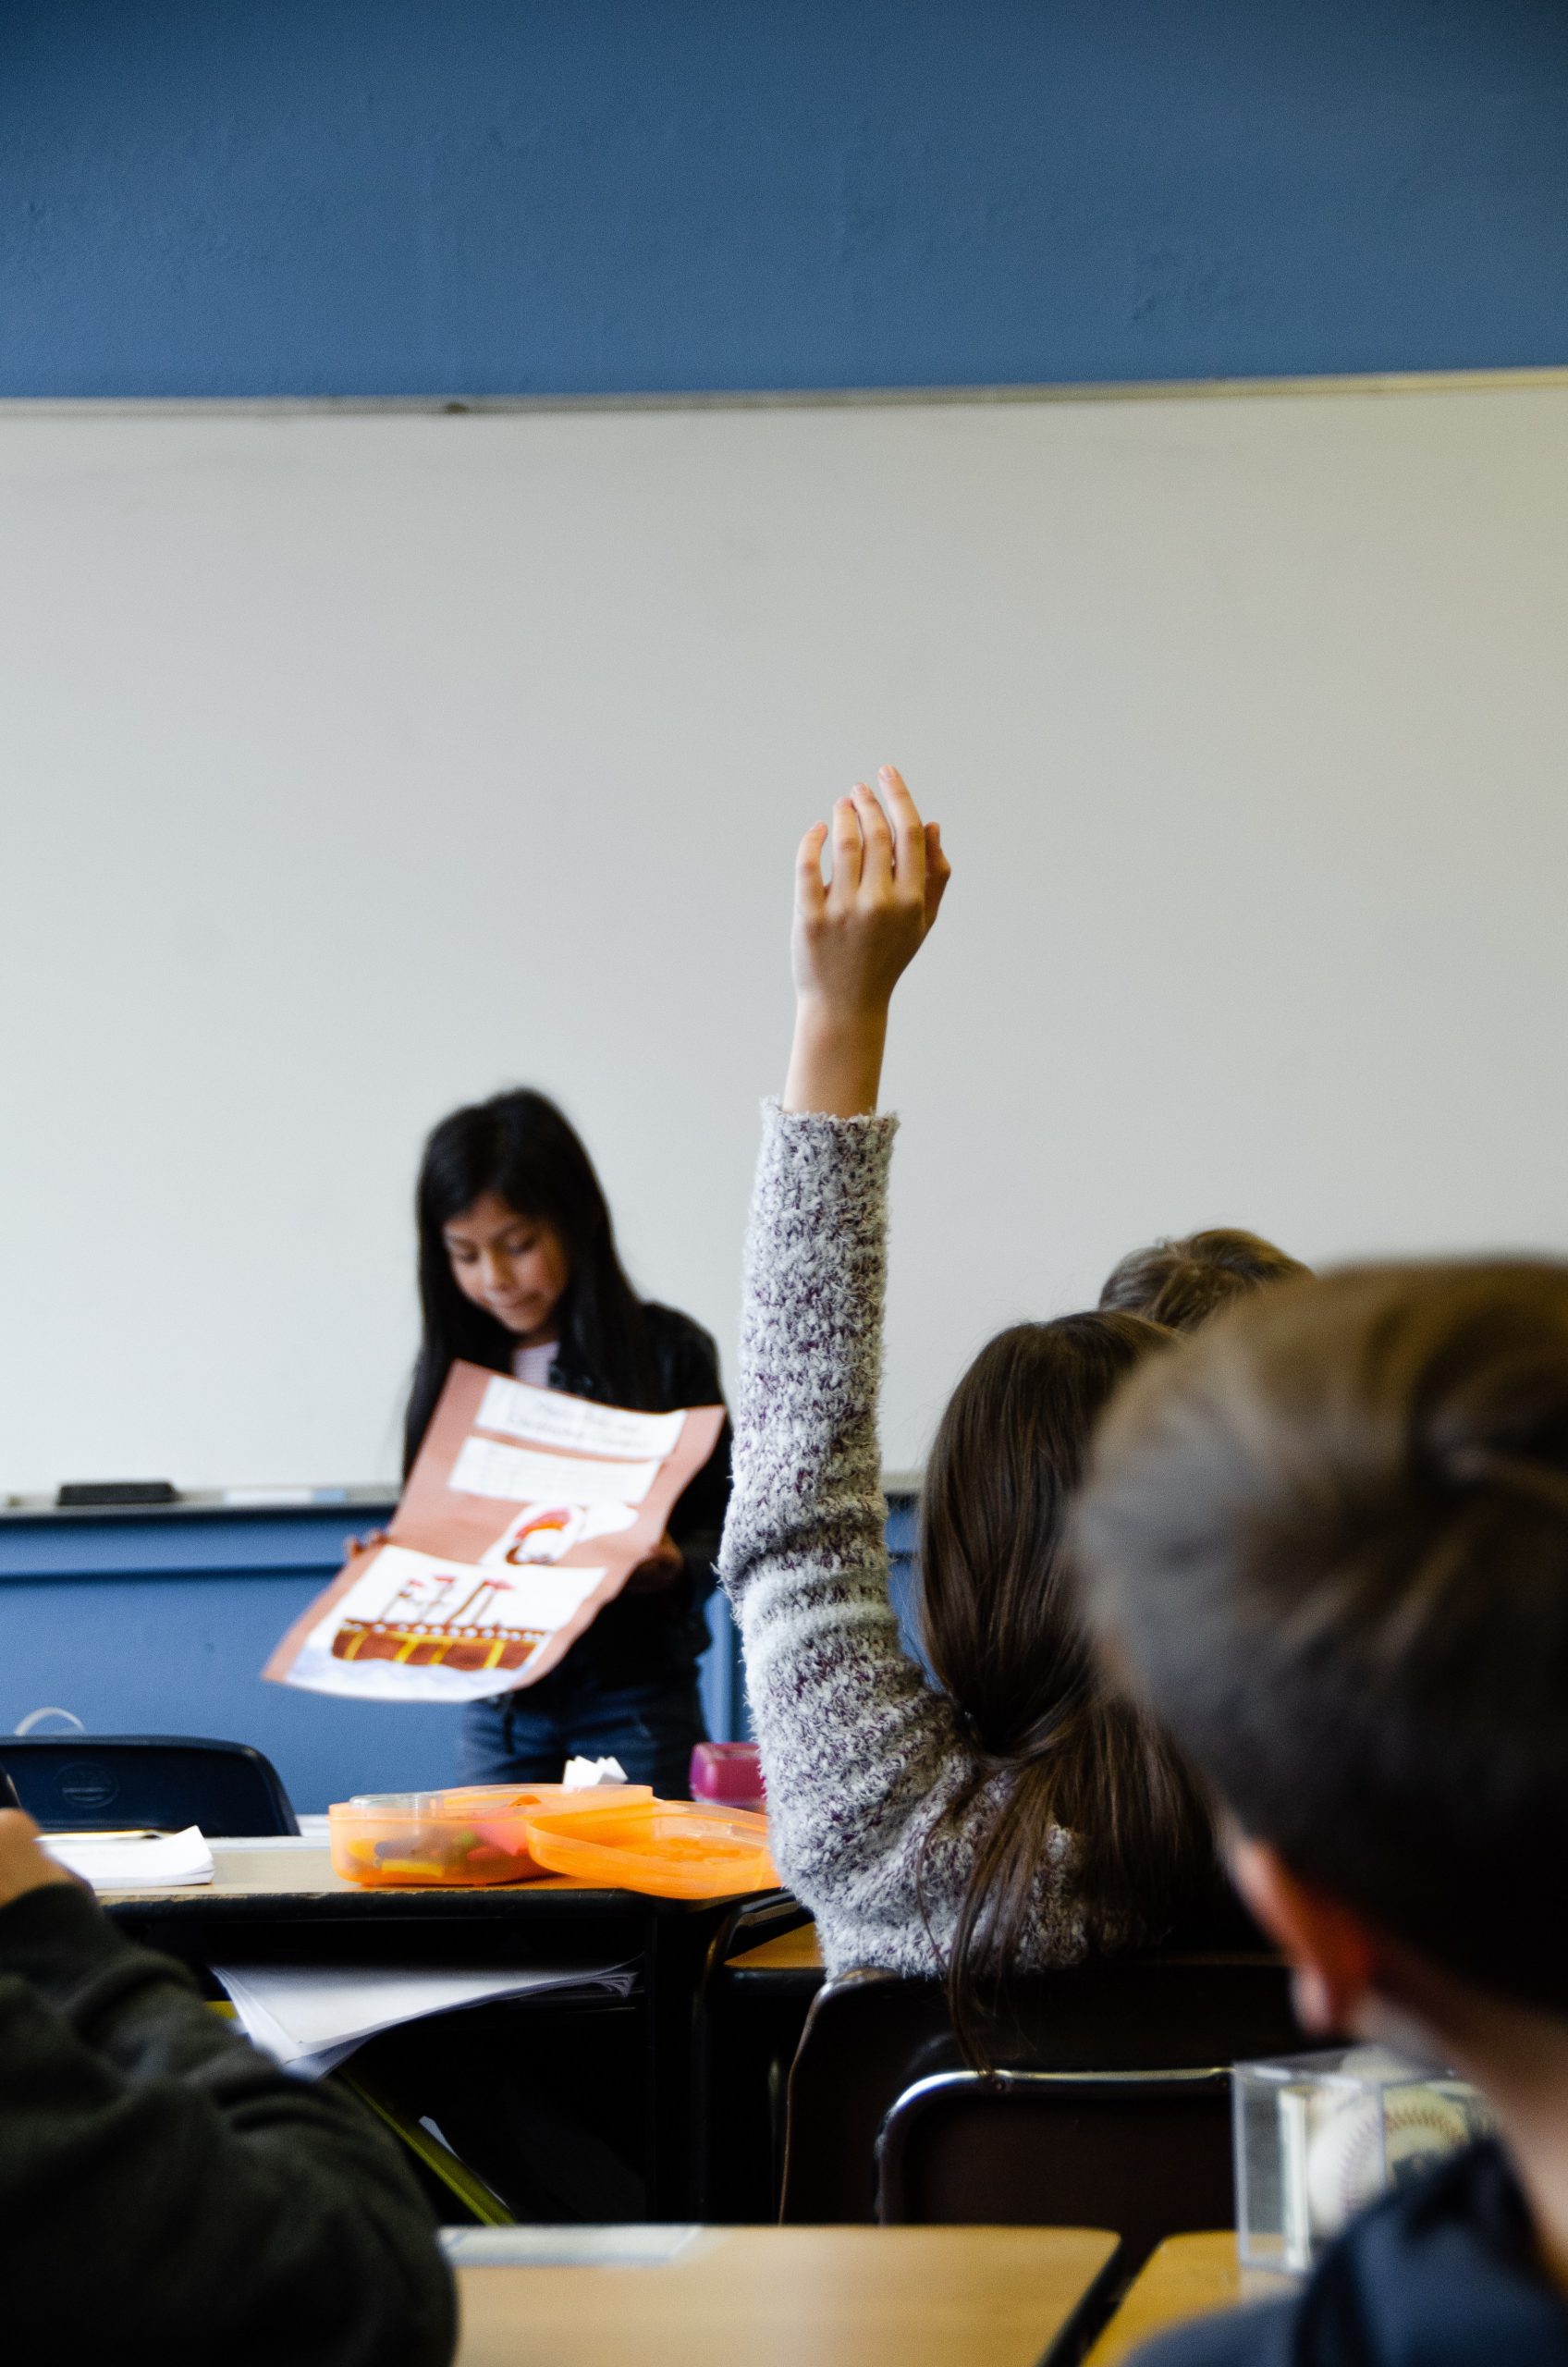 Student in grey sweater raising her hand in a classroom during a class presentation